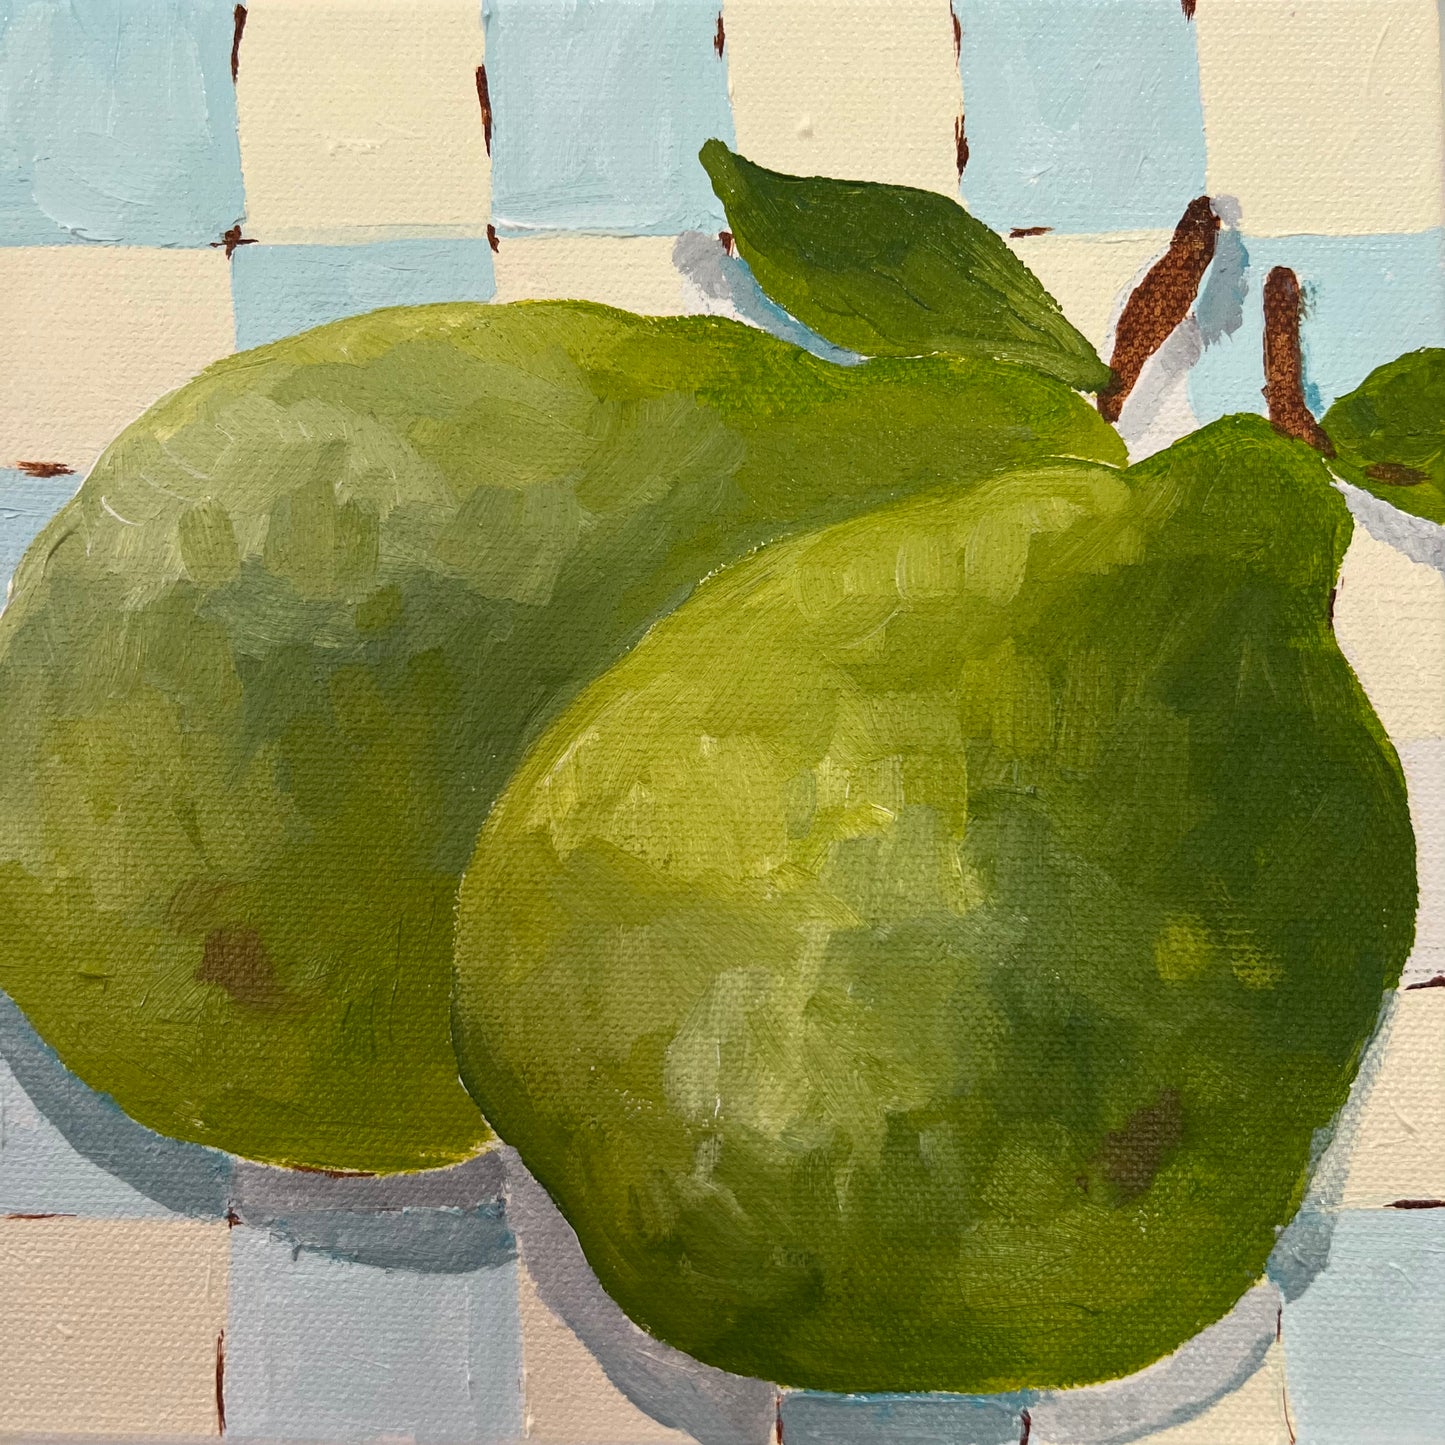 “Pears on cream + pale blue check”